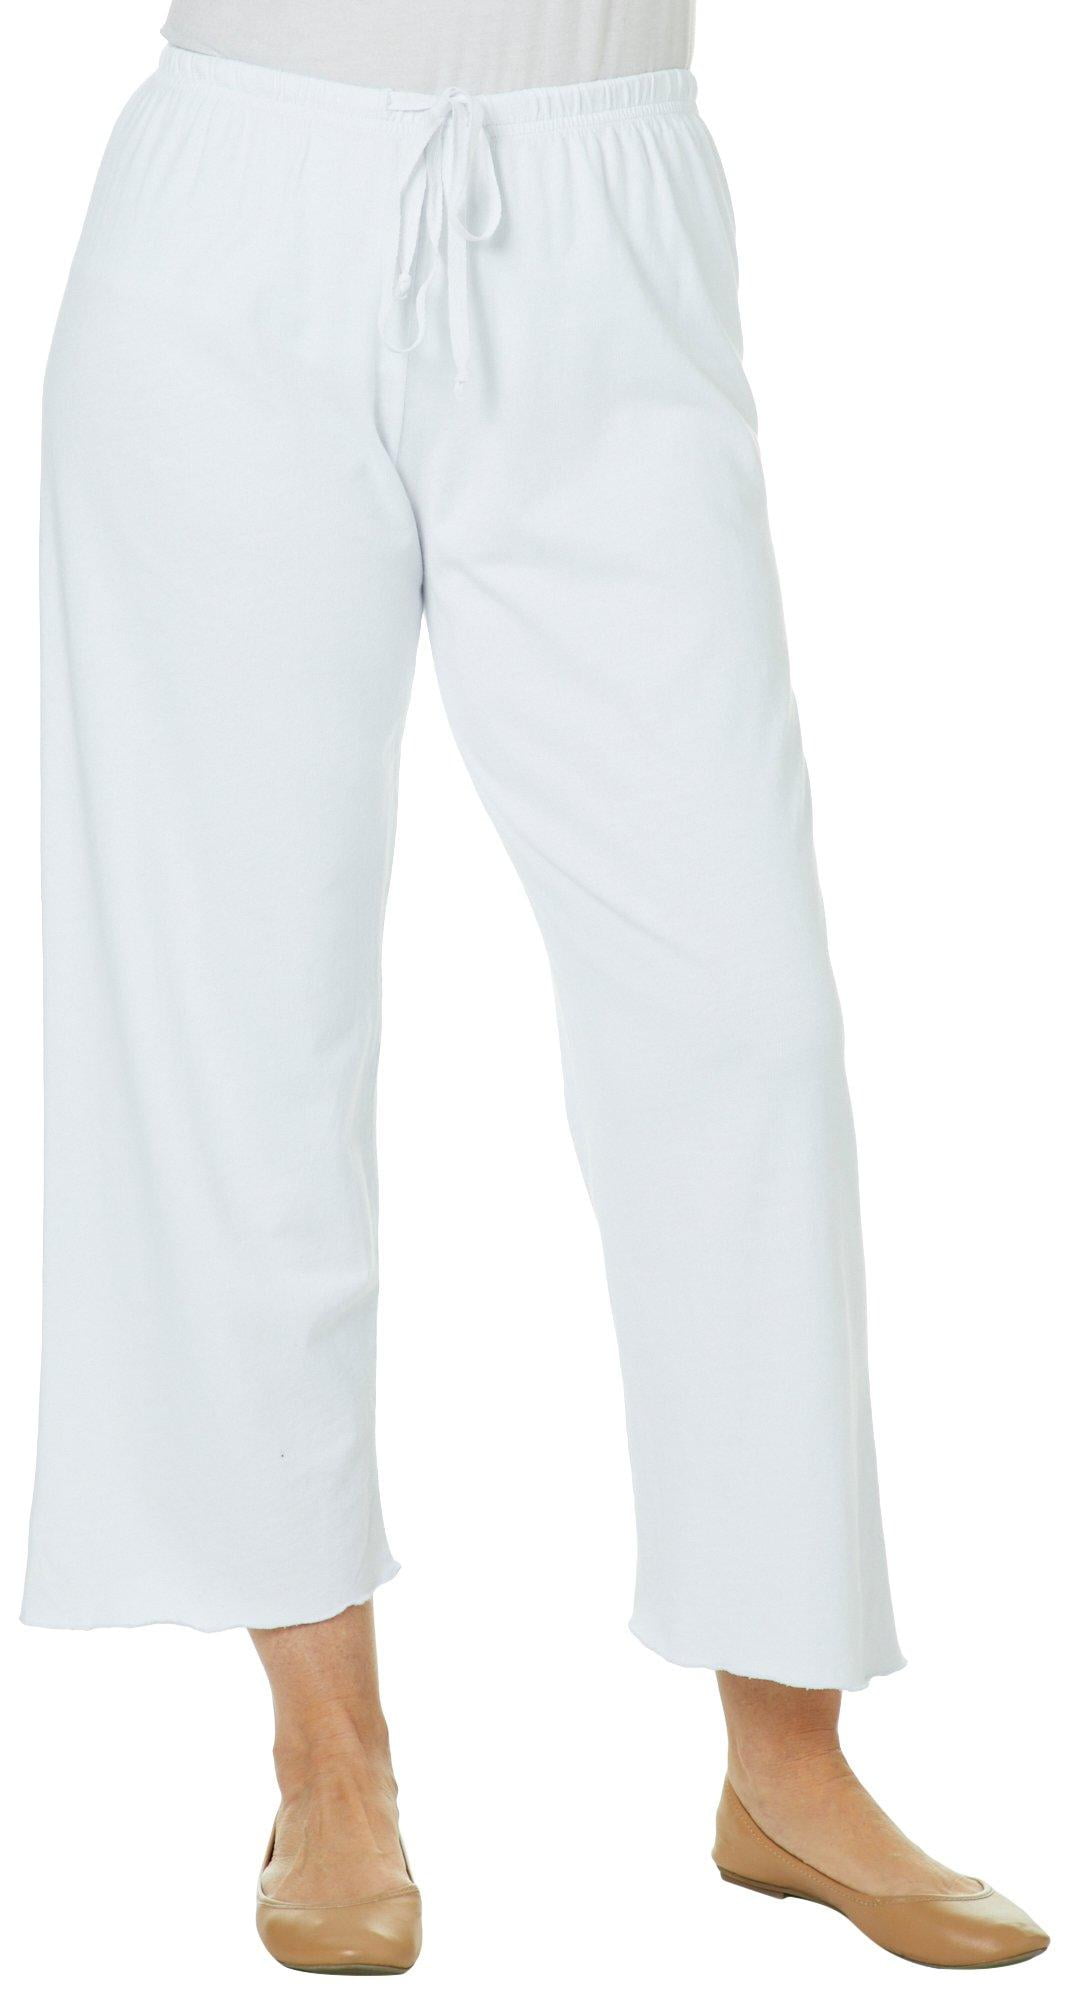 Hot Cotton - Hot Cotton Womens Solid Pull On Pants 16W Short - Walmart.com